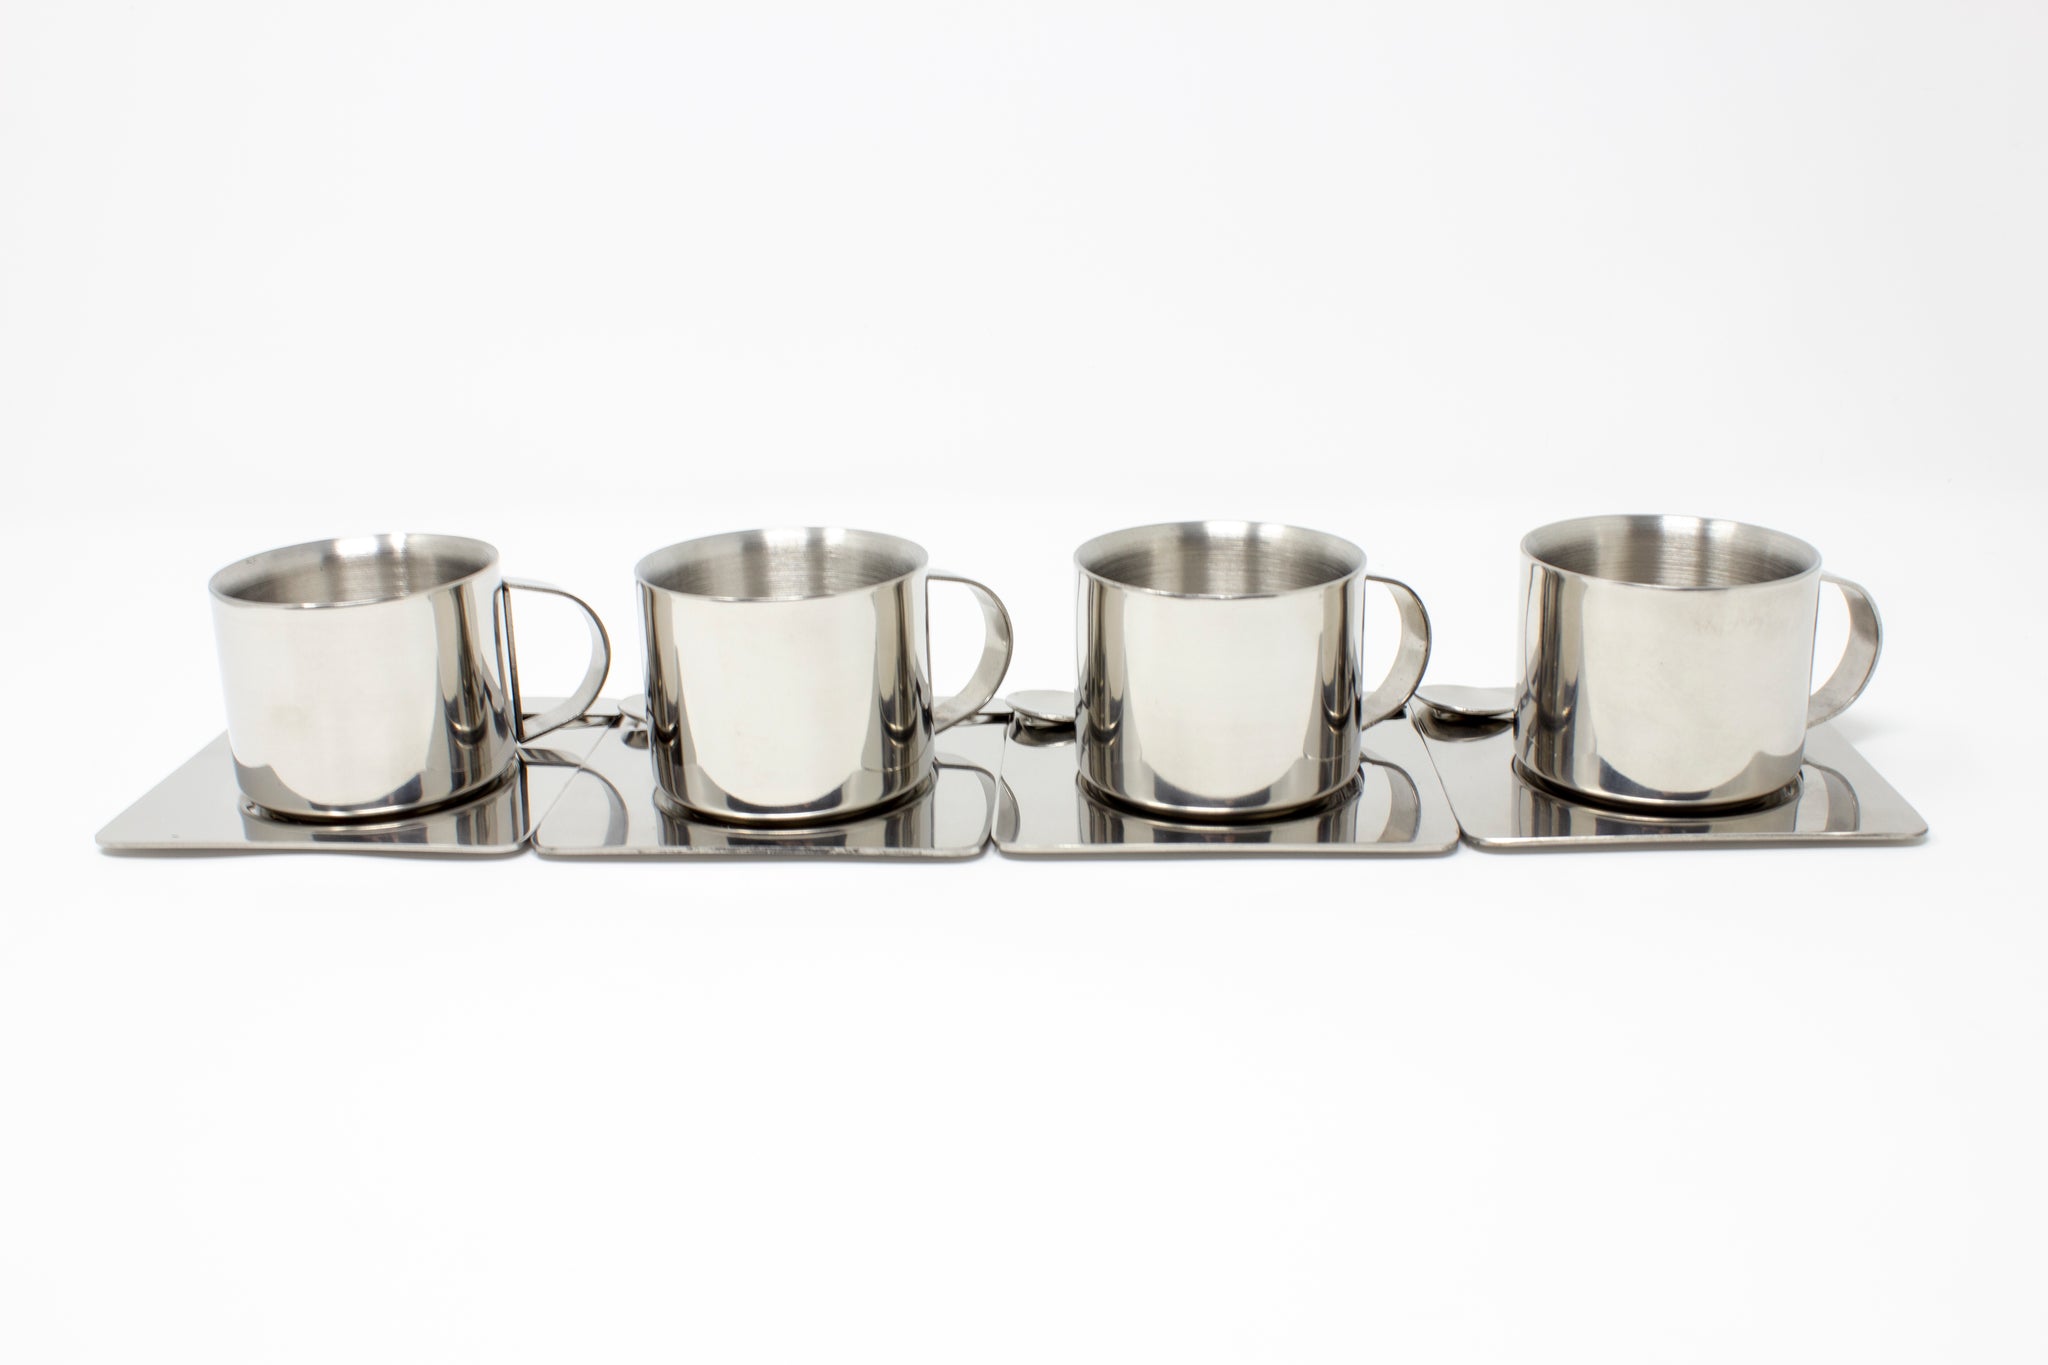 Espresso Cups with Saucers & Spoons - Set of 4